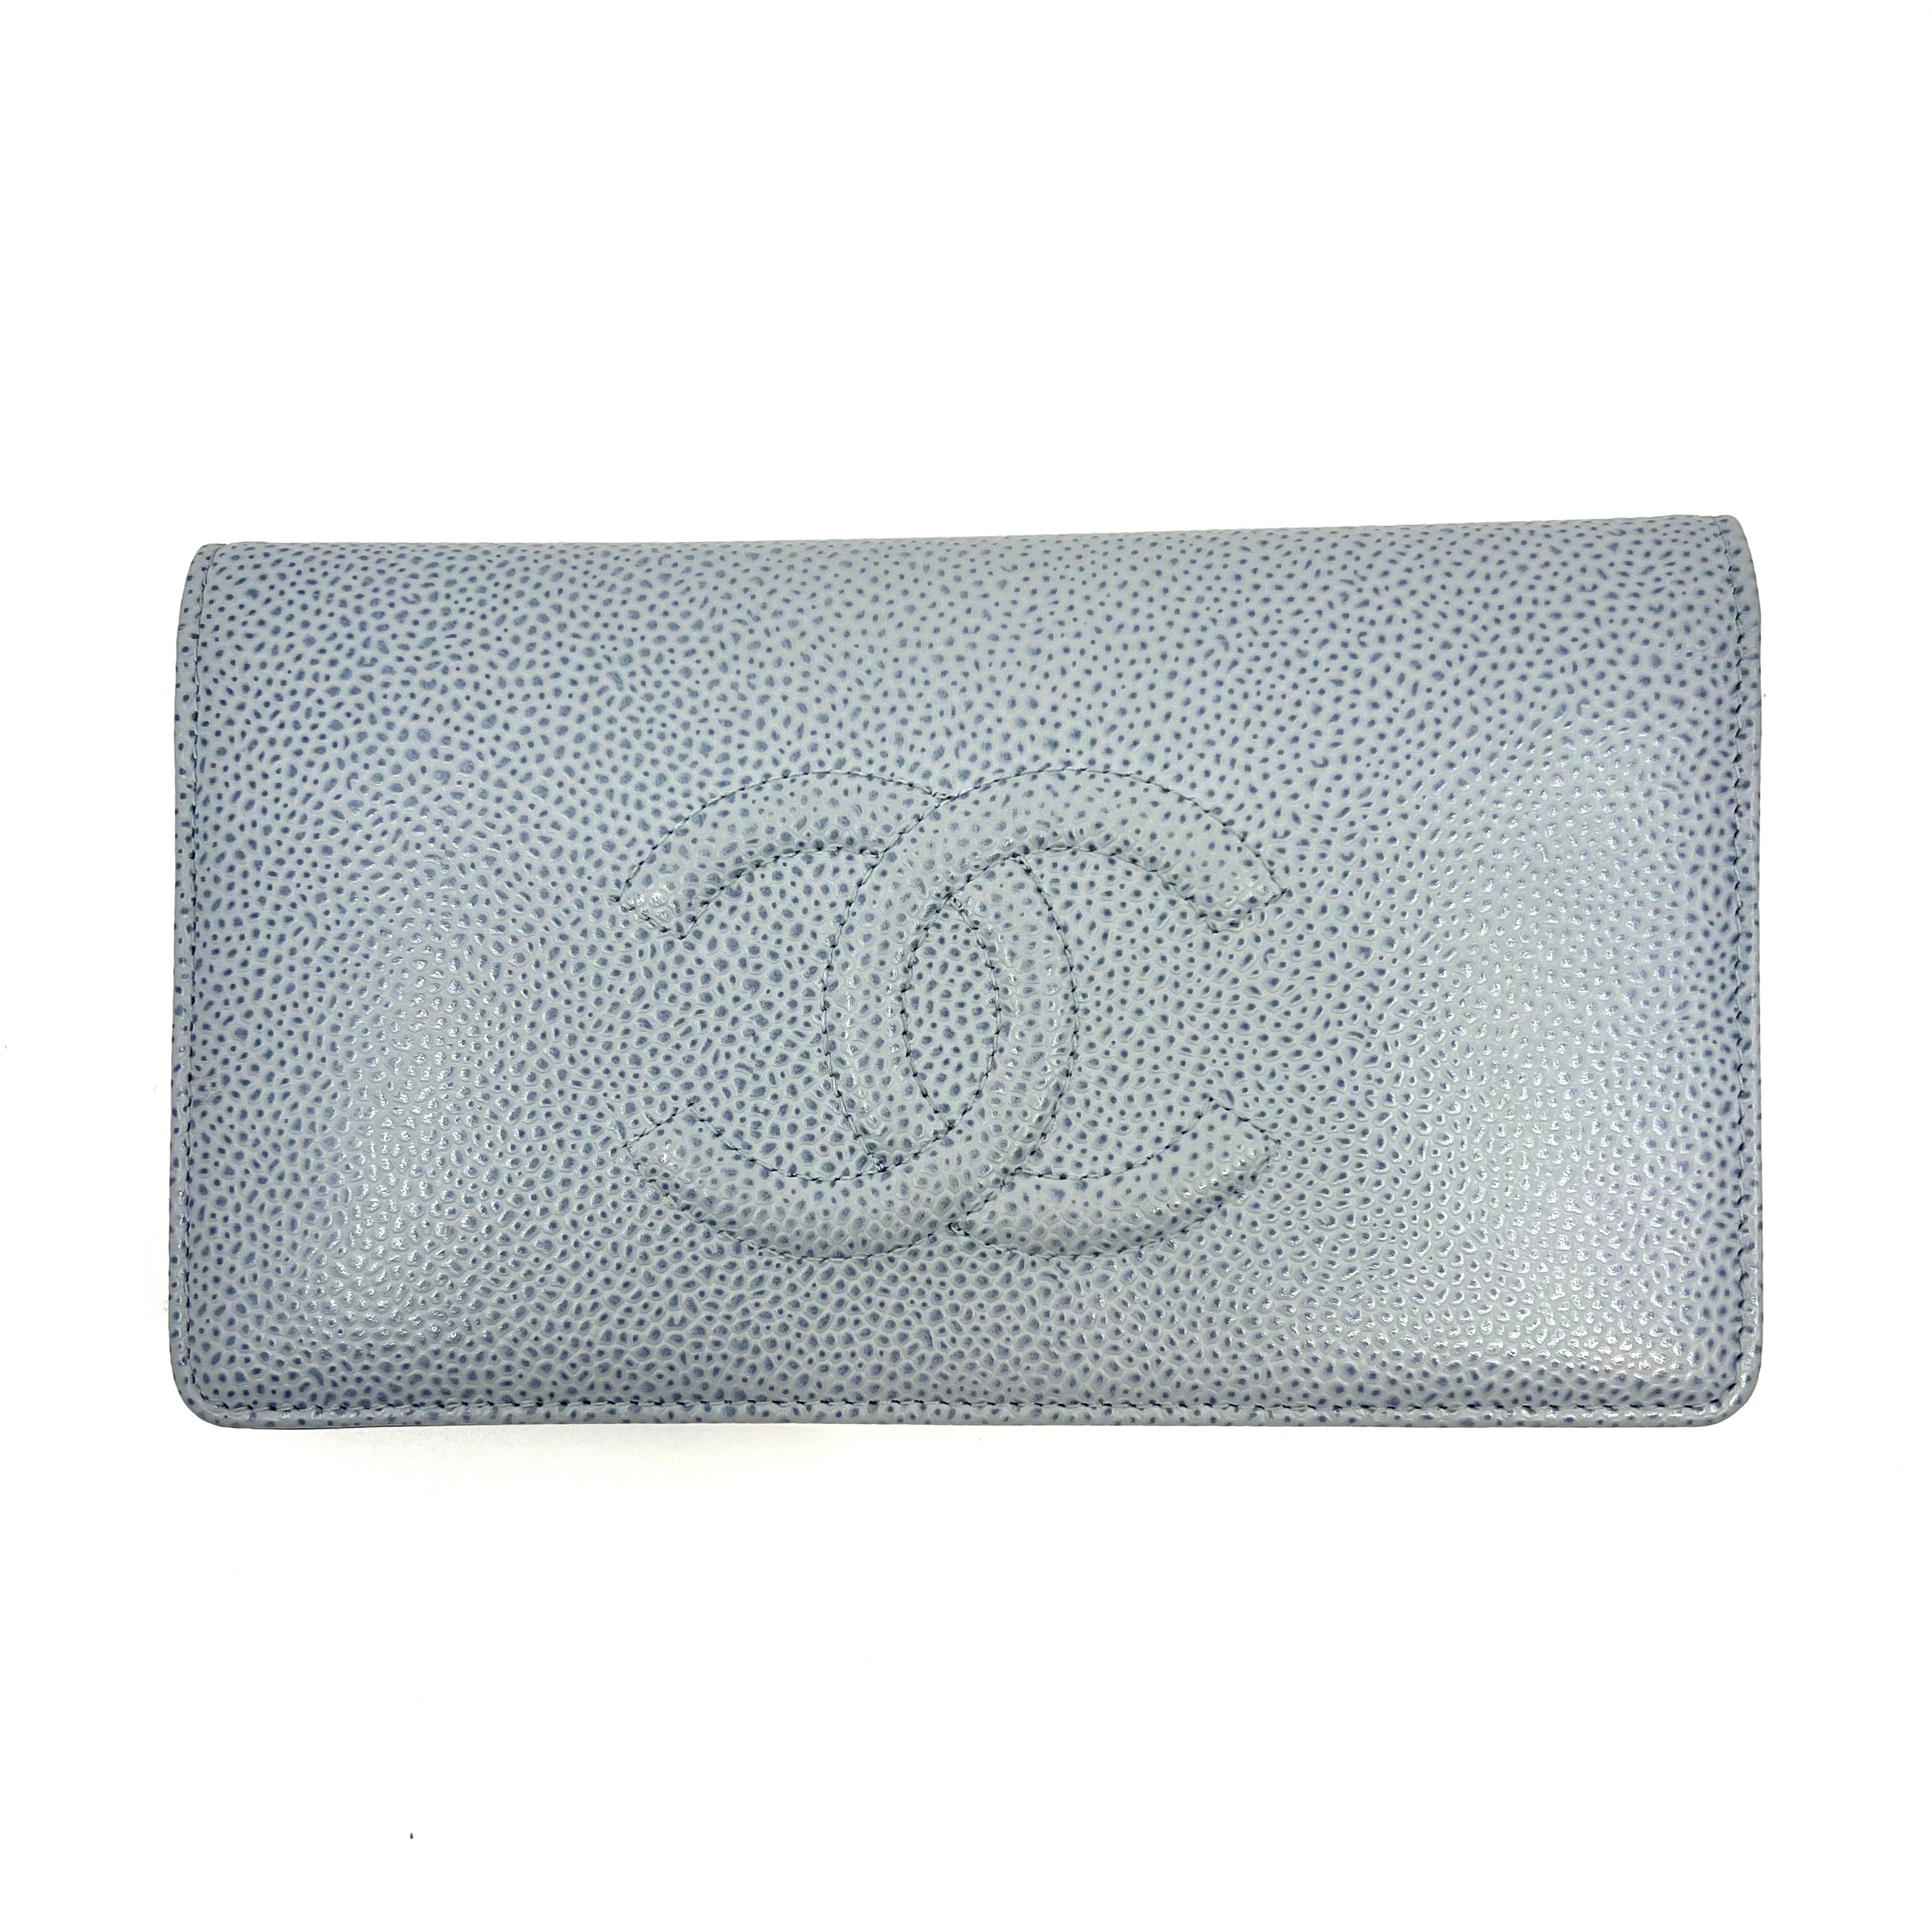 CHANEL Women's Wallets with Vintage for sale